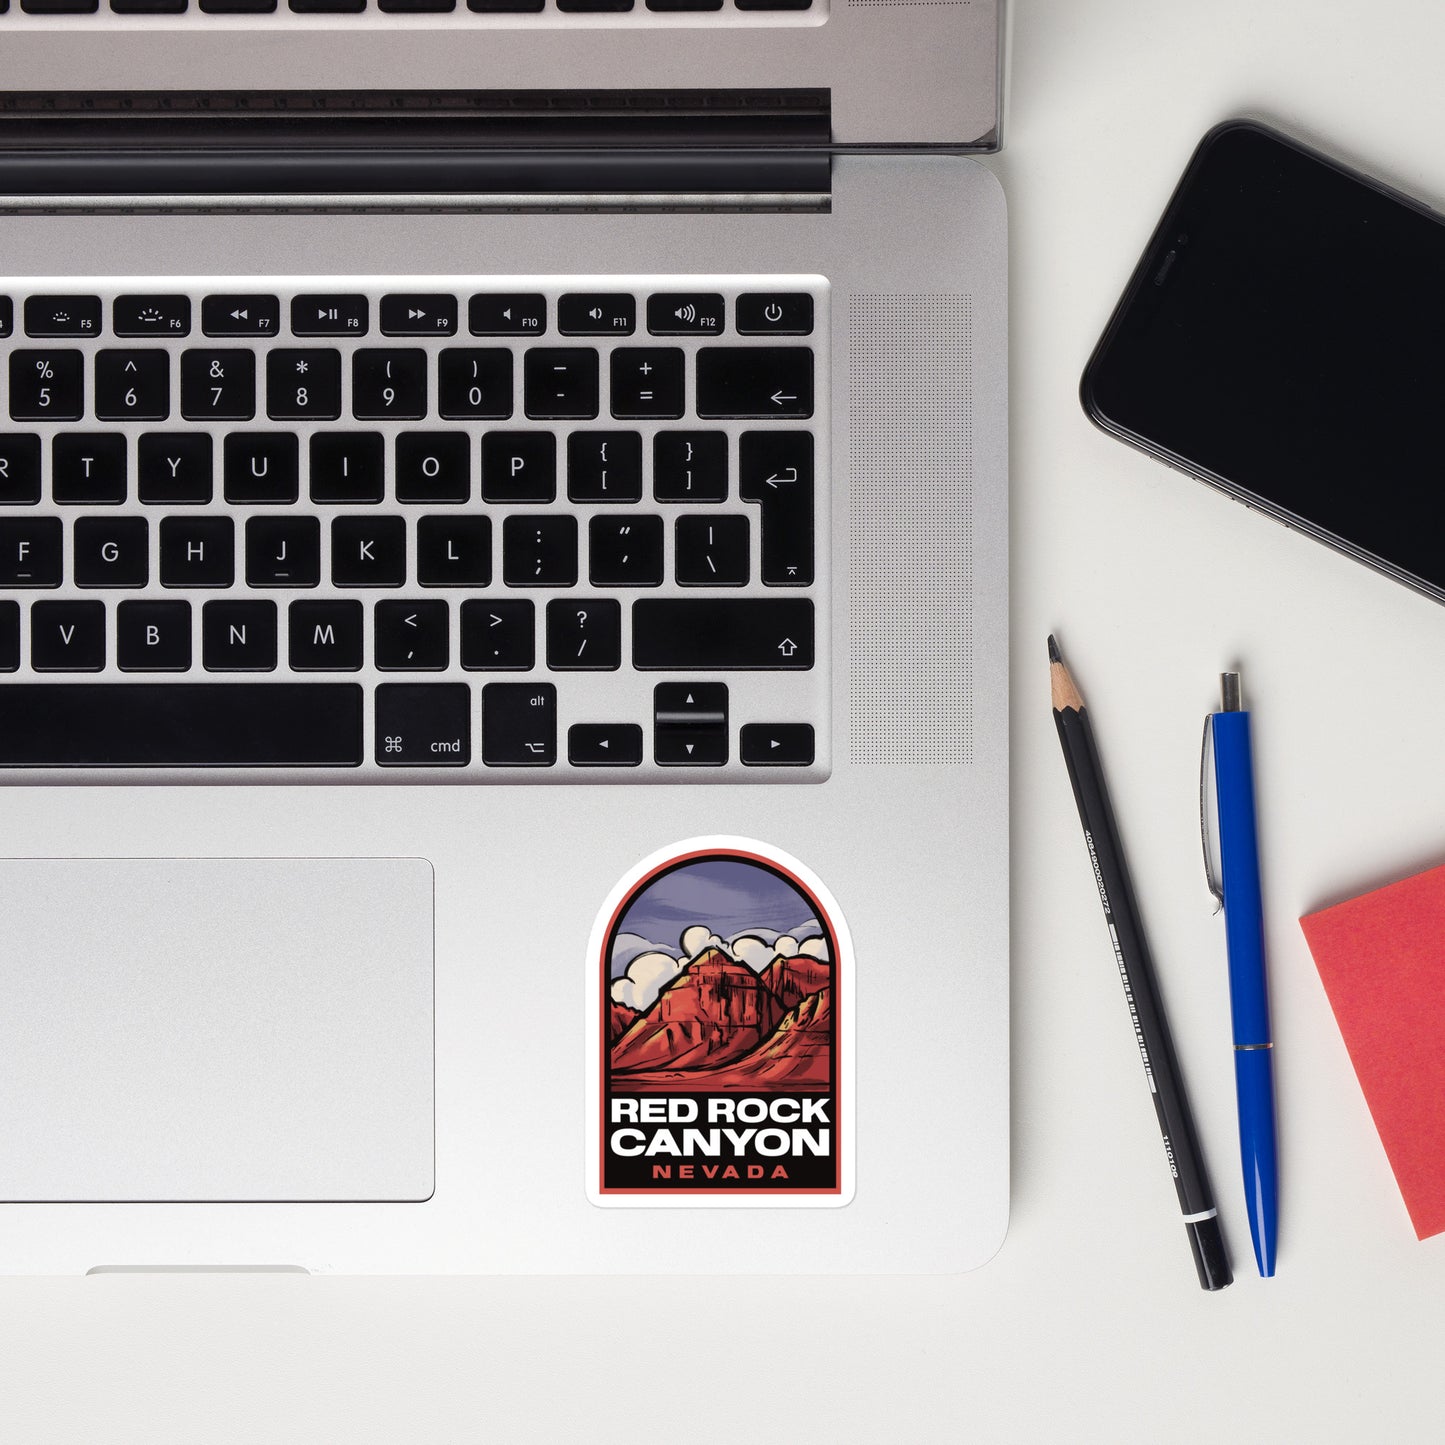 A sticker of Red Rock Canyon Nevada on a laptop